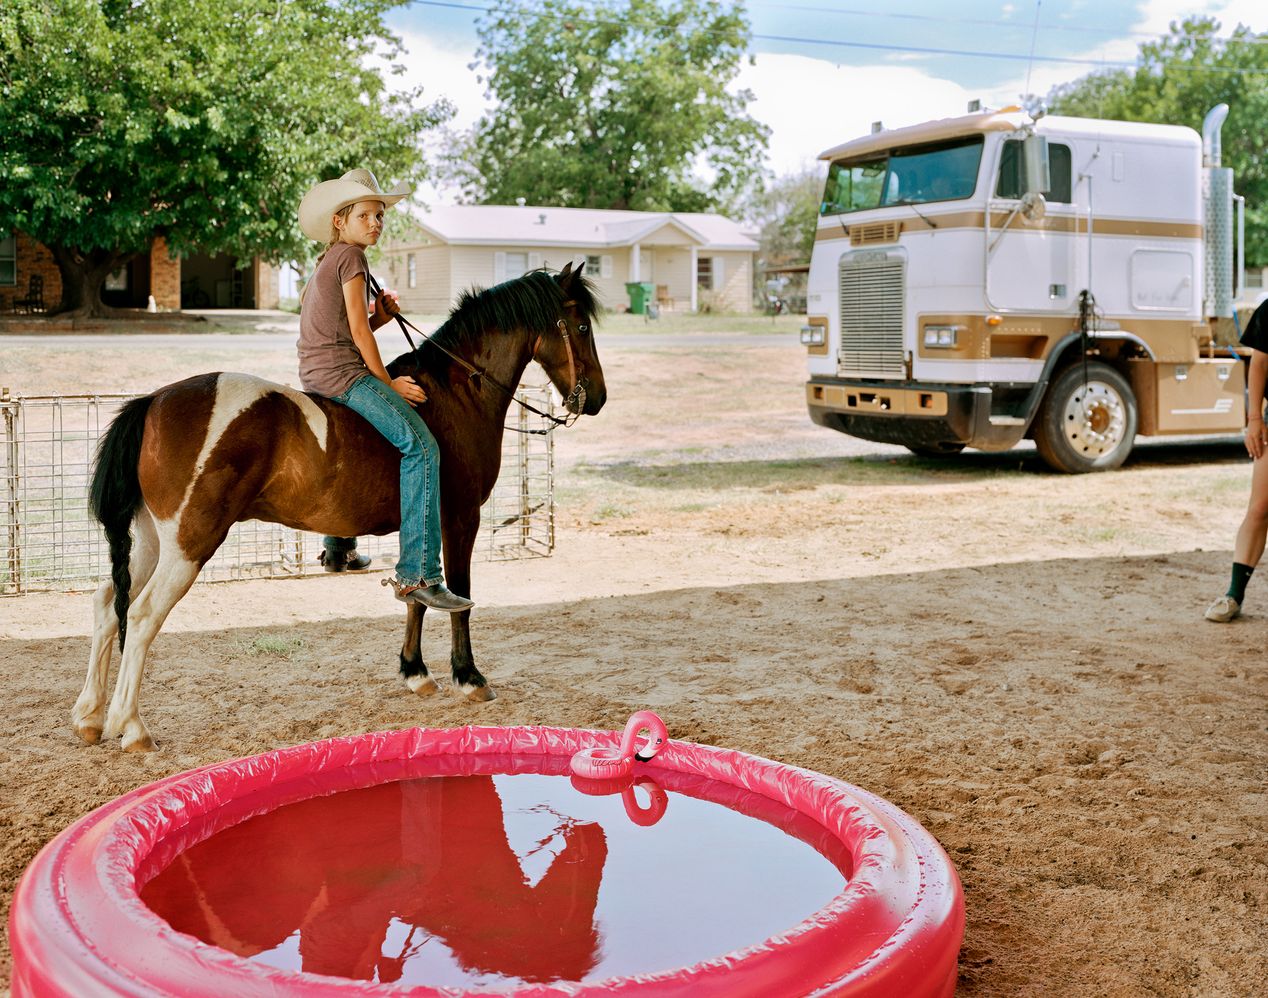 Young cowgirl riding her small horse, next to a truck and an inflatable pink pool, environmental portrait photography, Ilona Szwarc, contemporary Los Angeles artist.